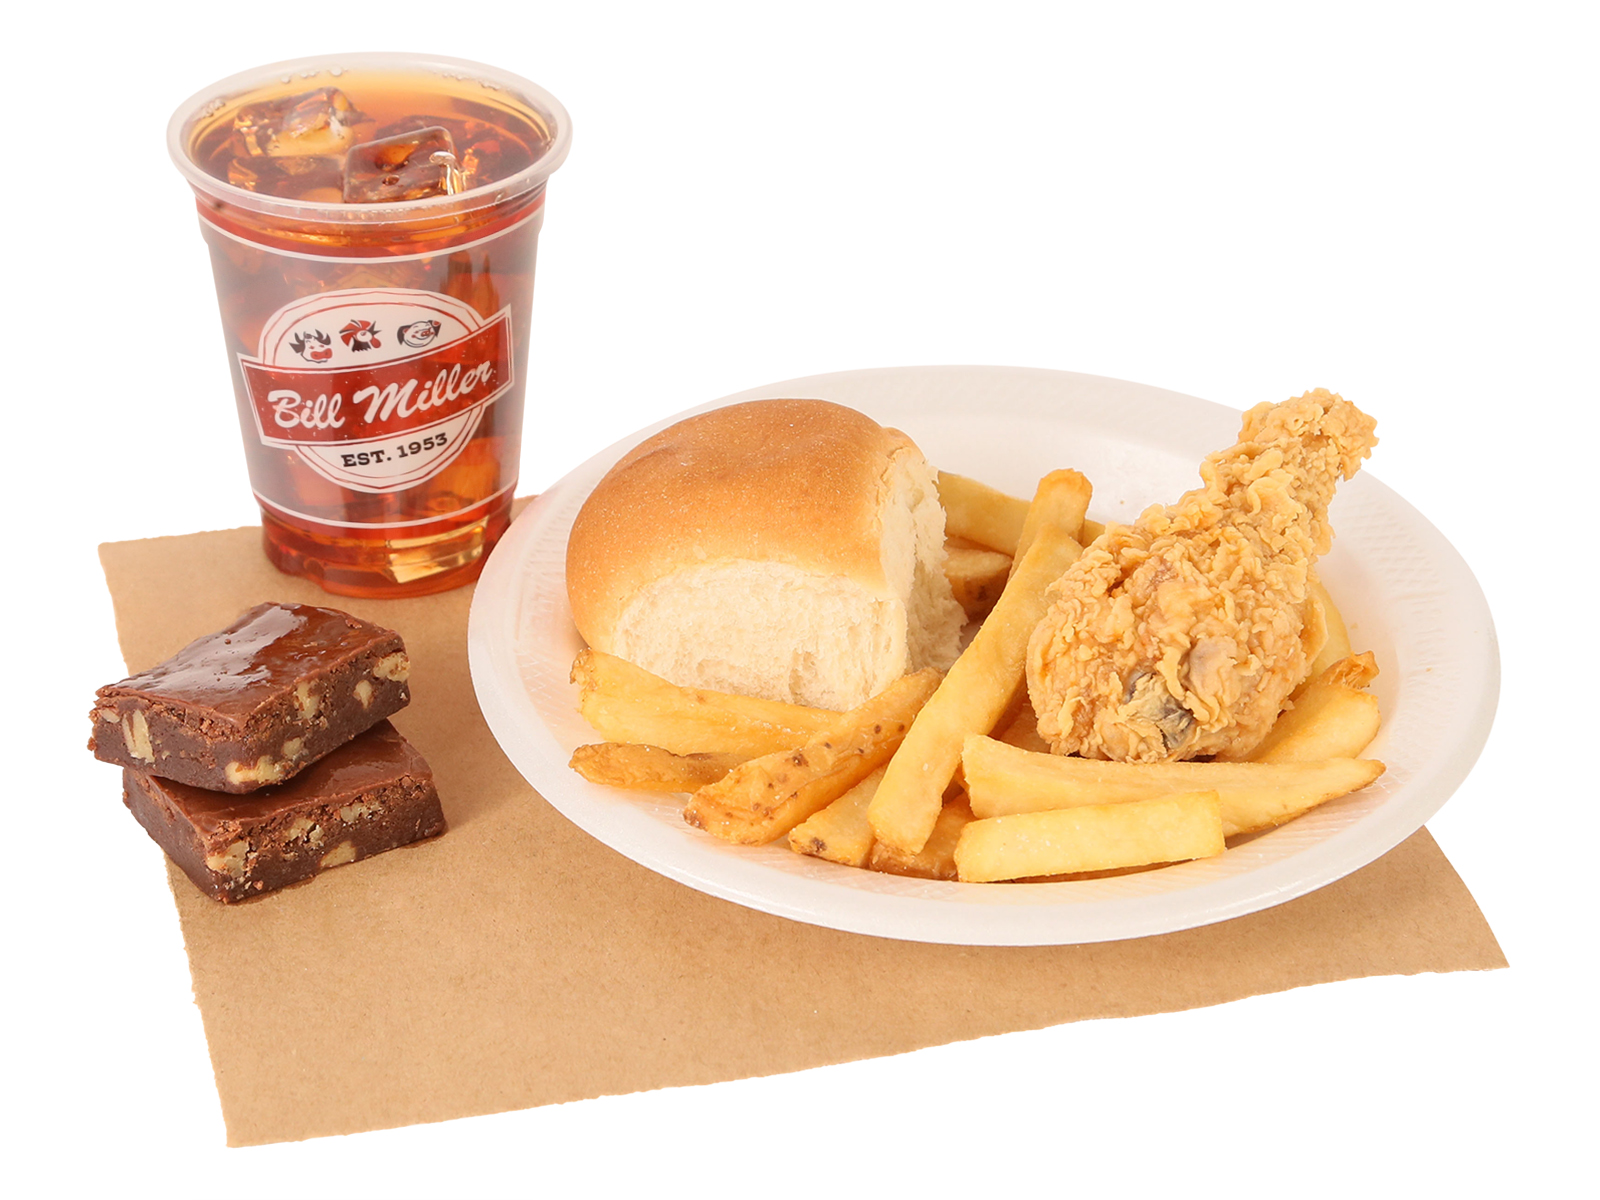 Buckaroos 1pc. Fried Chicken Leg served with french fries, small tea, & 2 brownies